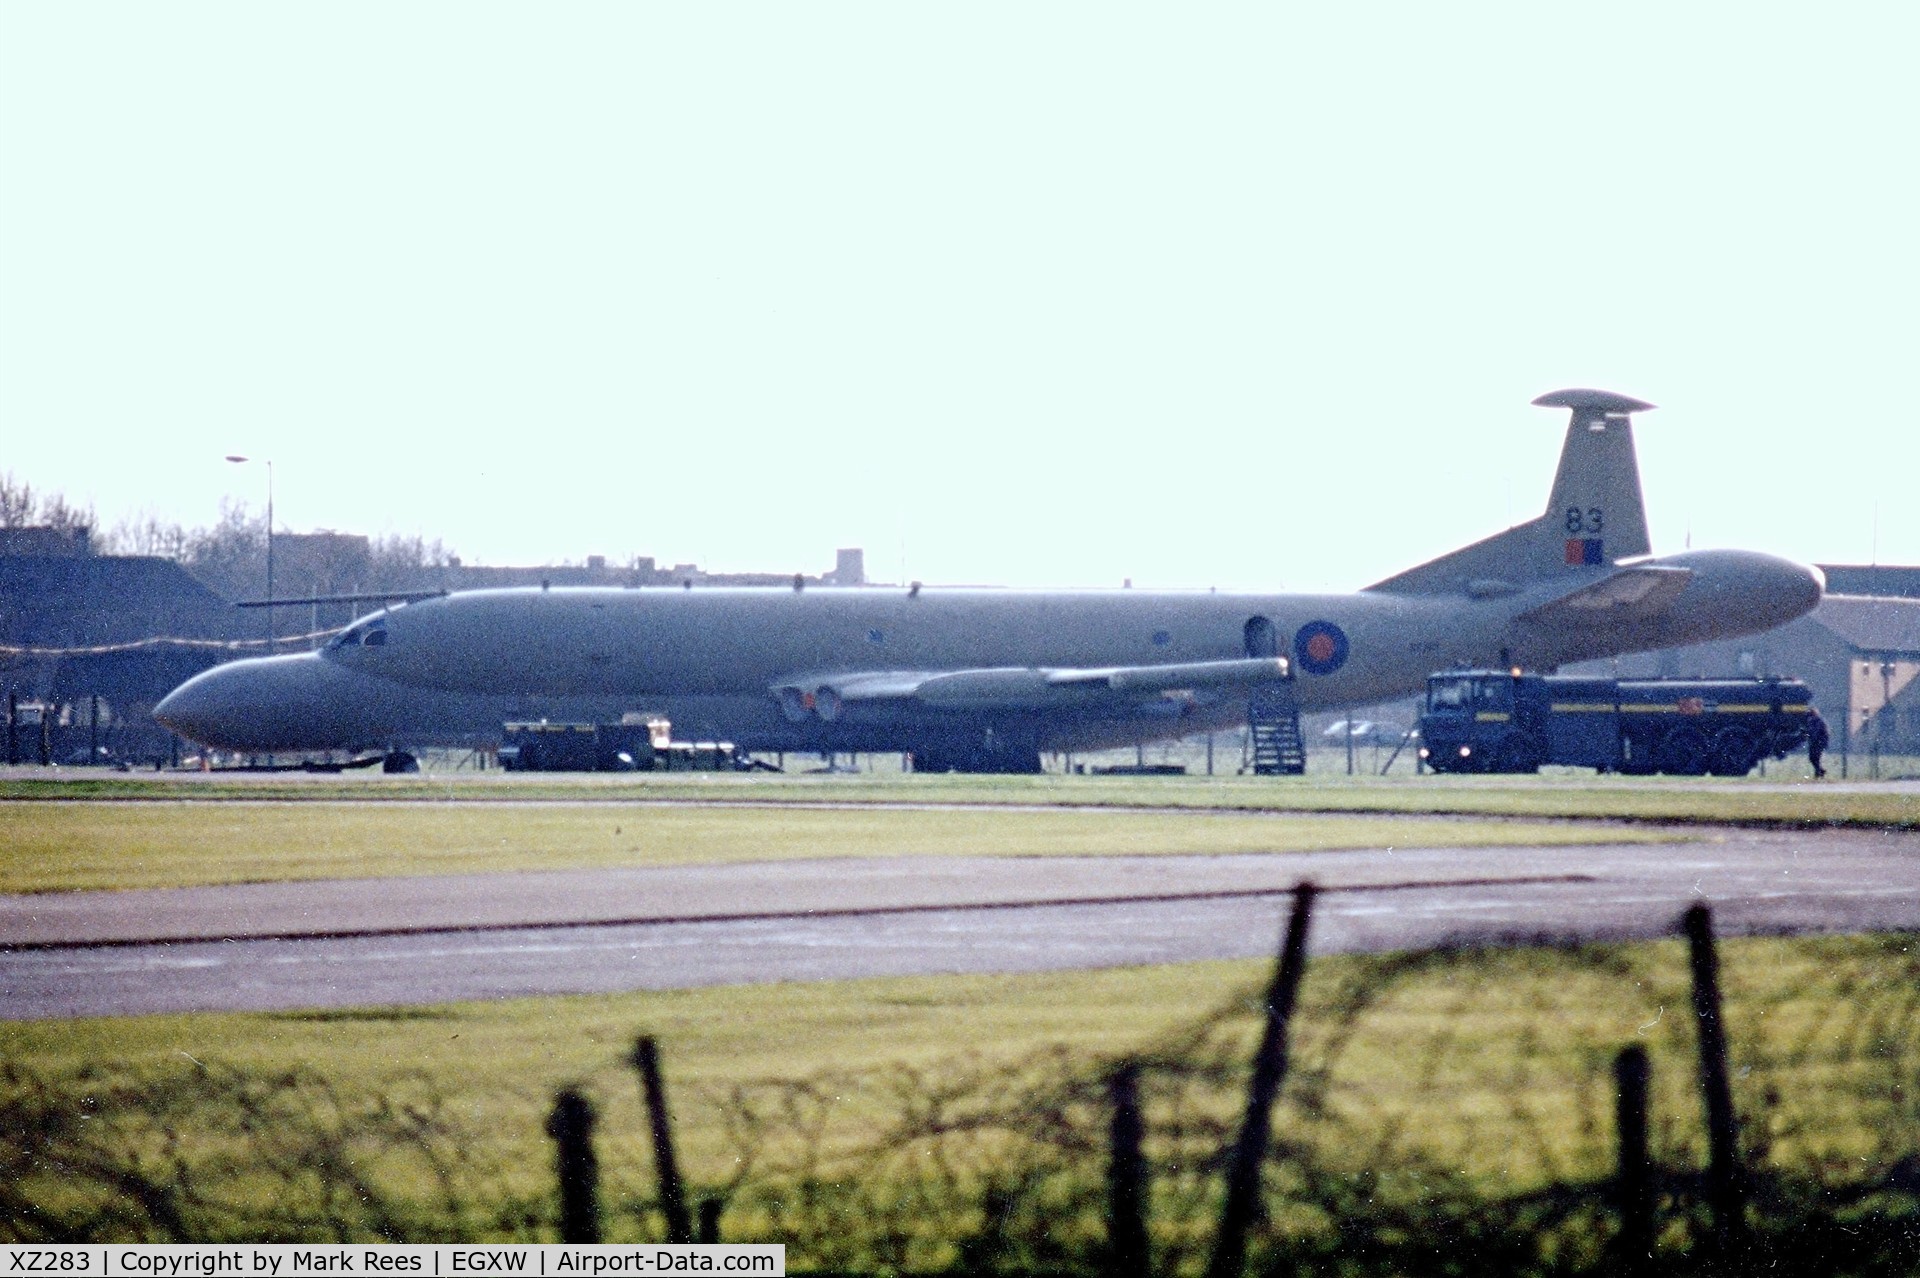 XZ283, British Aerospace Nimrod AEW.3 C/N 8045, XZ283  as a AEW3 at Waddington undergoing trials, whilst they were still trying to get it to work.